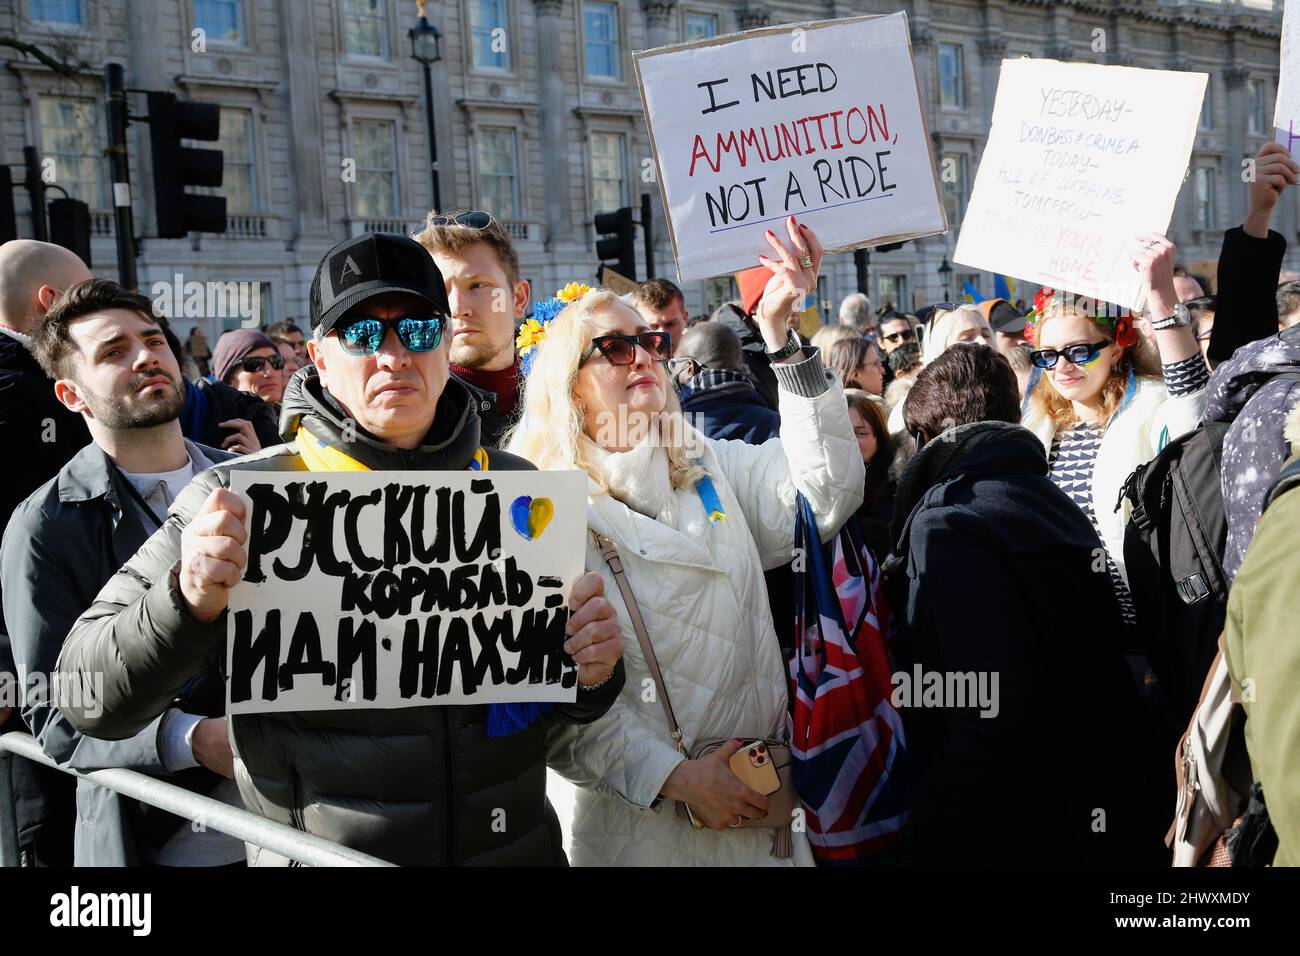 England, London, People protesting against the Russian invasion of Ukraine. Stock Photo